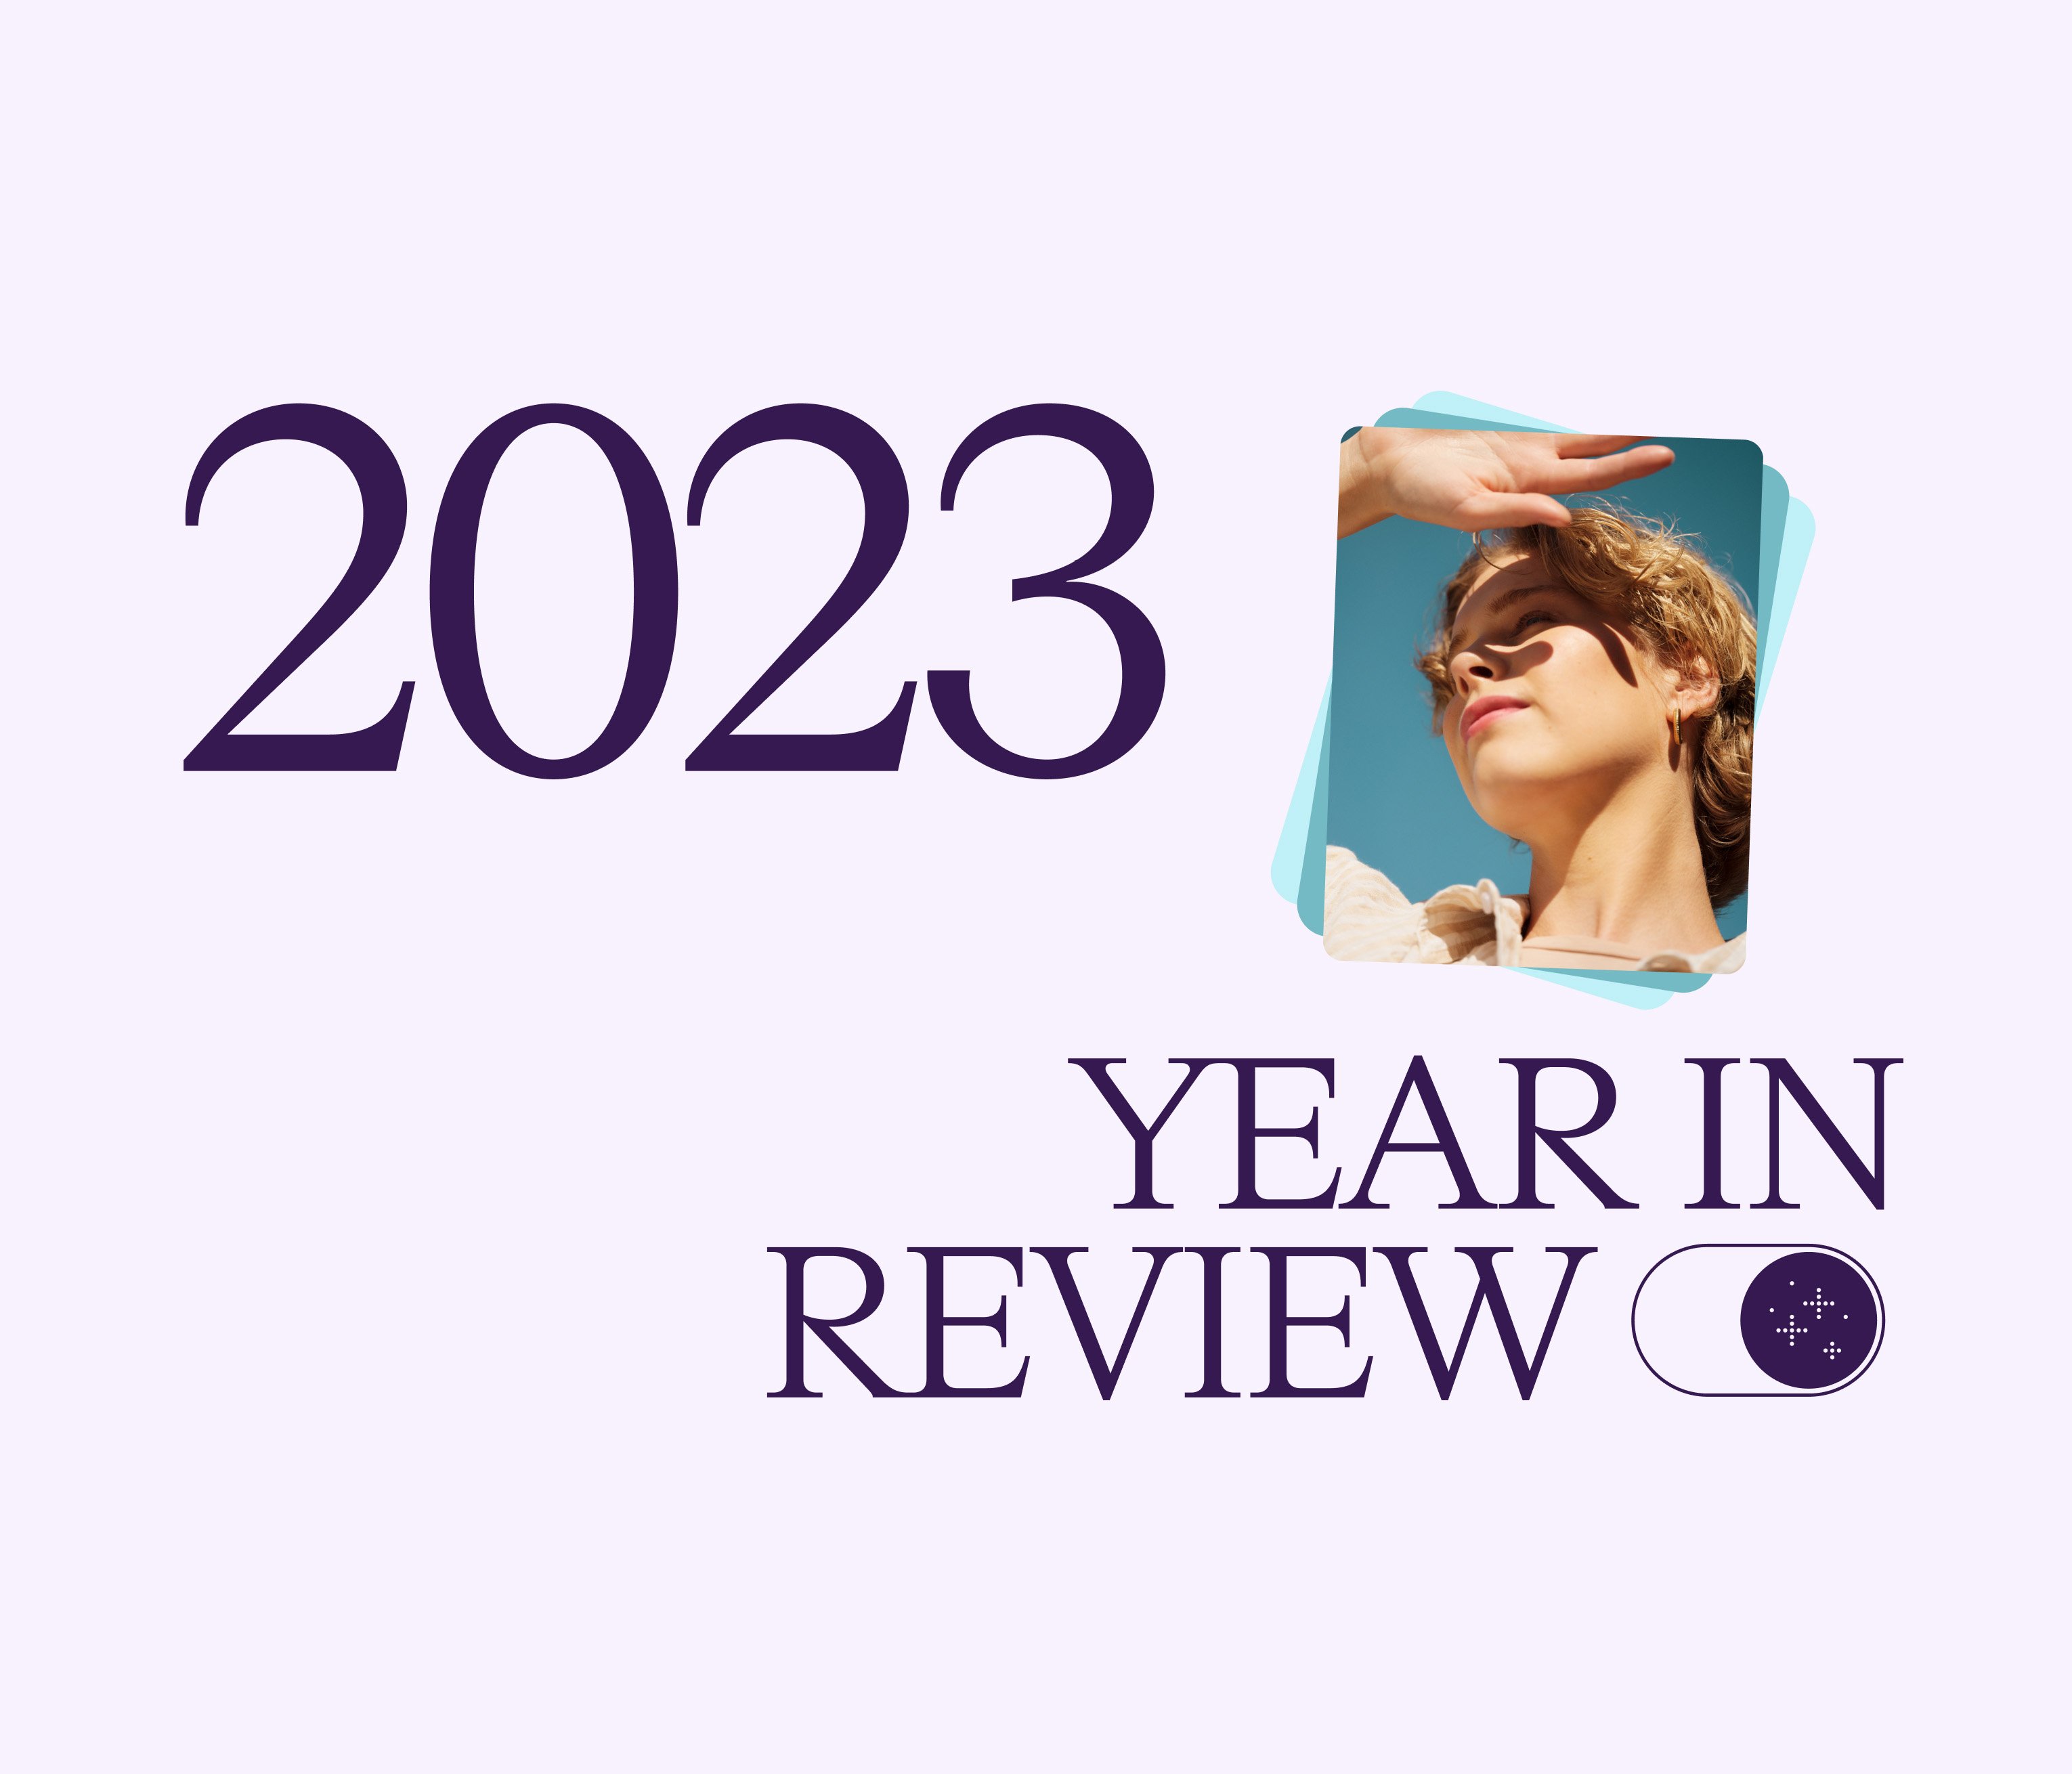 2023 Year in Review Image